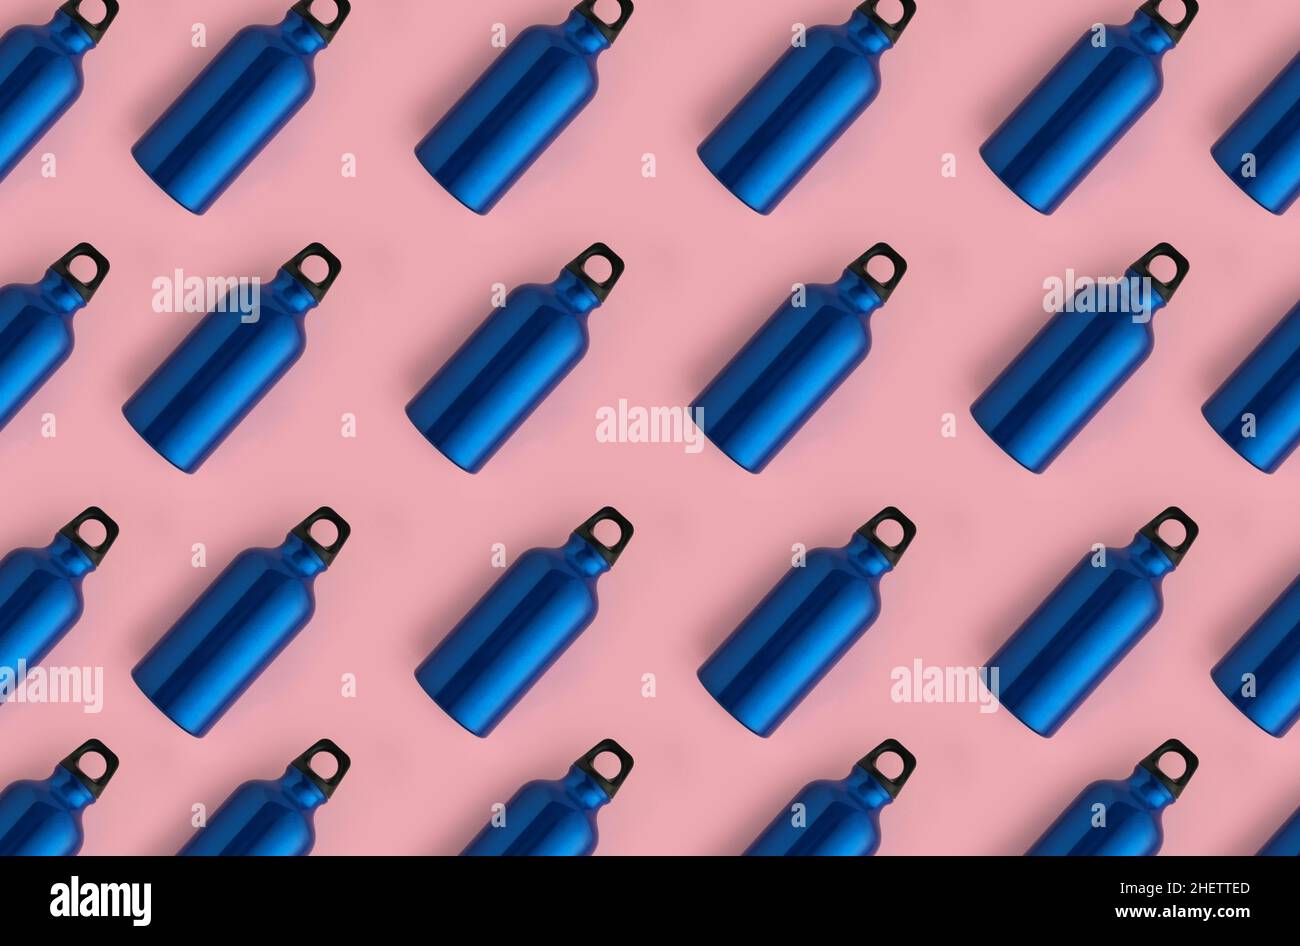 Seamless pattern of blue steel water bottles on pink background Stock Photo